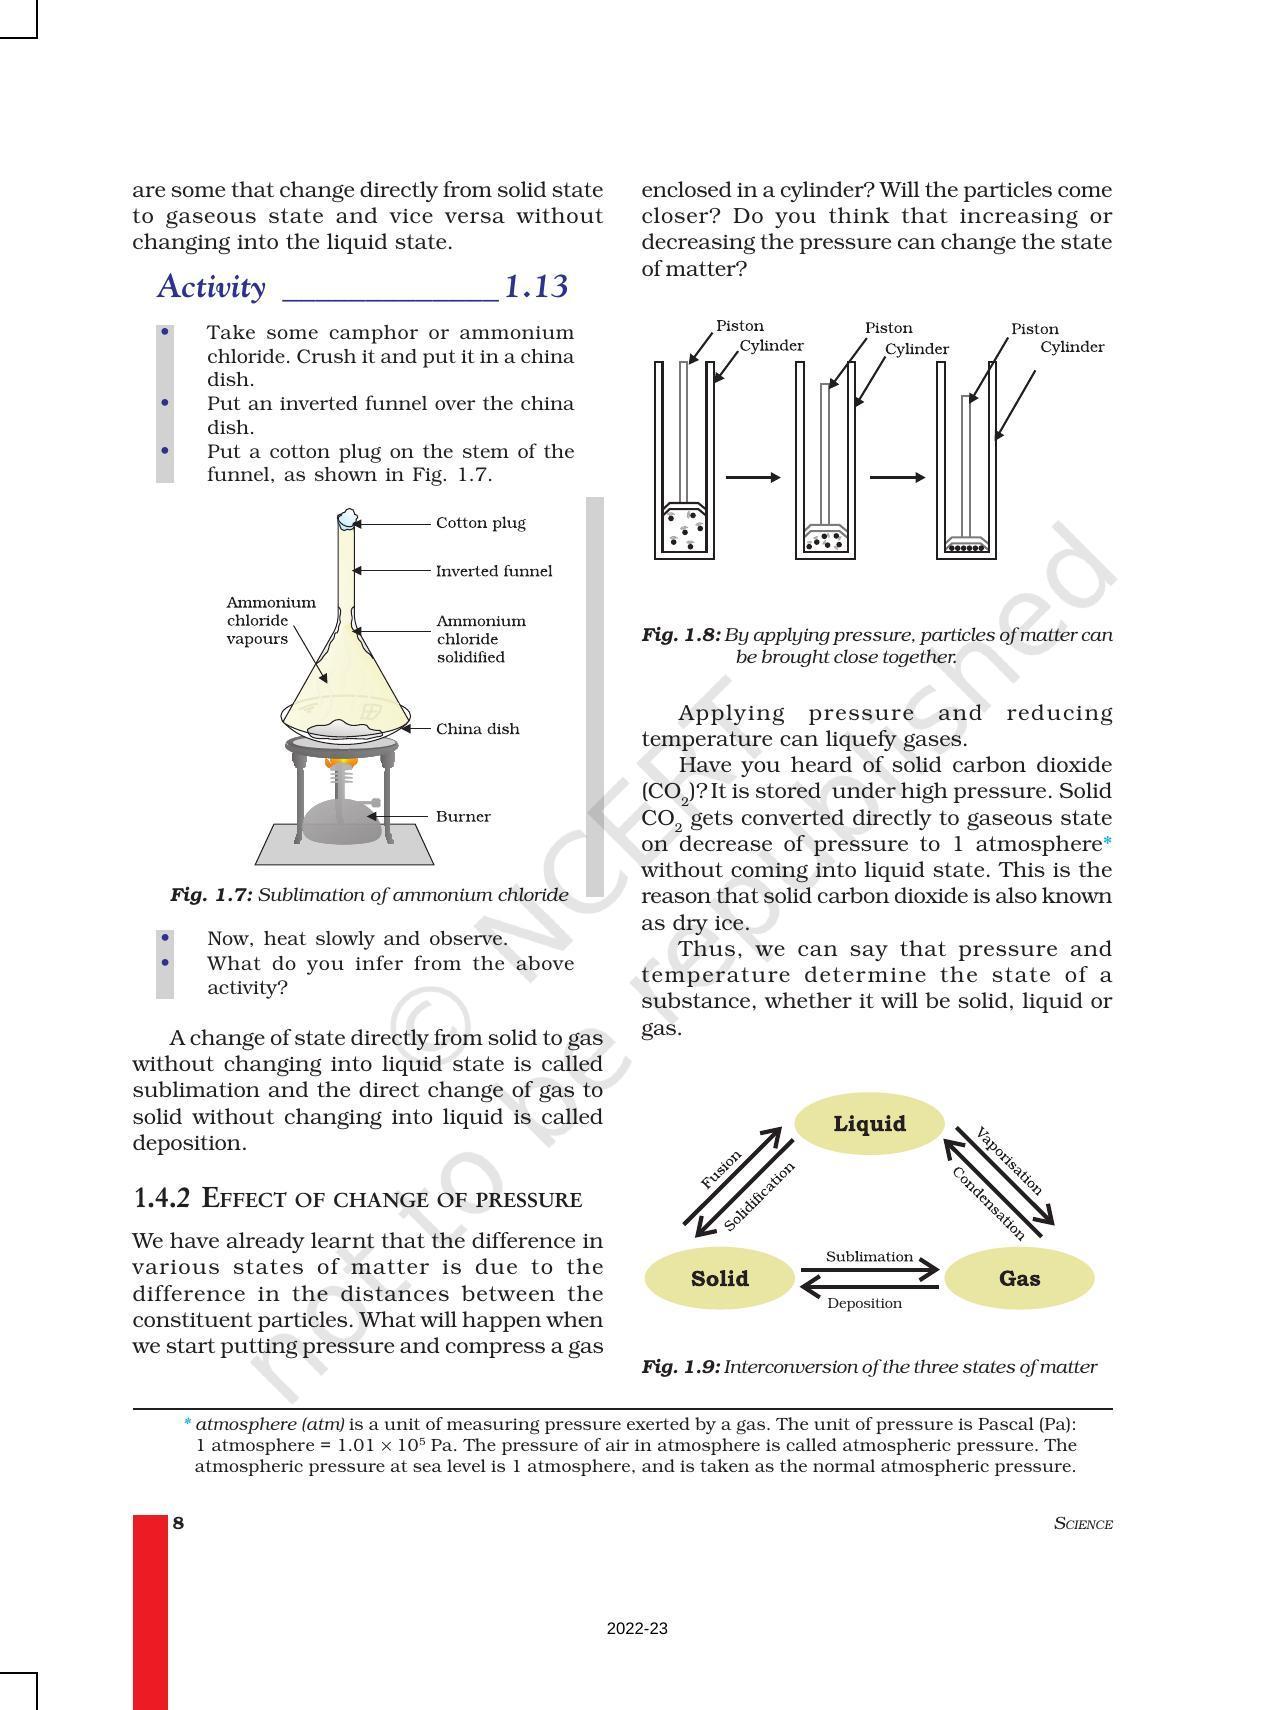 NCERT Book for Class 9 Science Chapter 1 Matter in Our Surroundings - Page 8